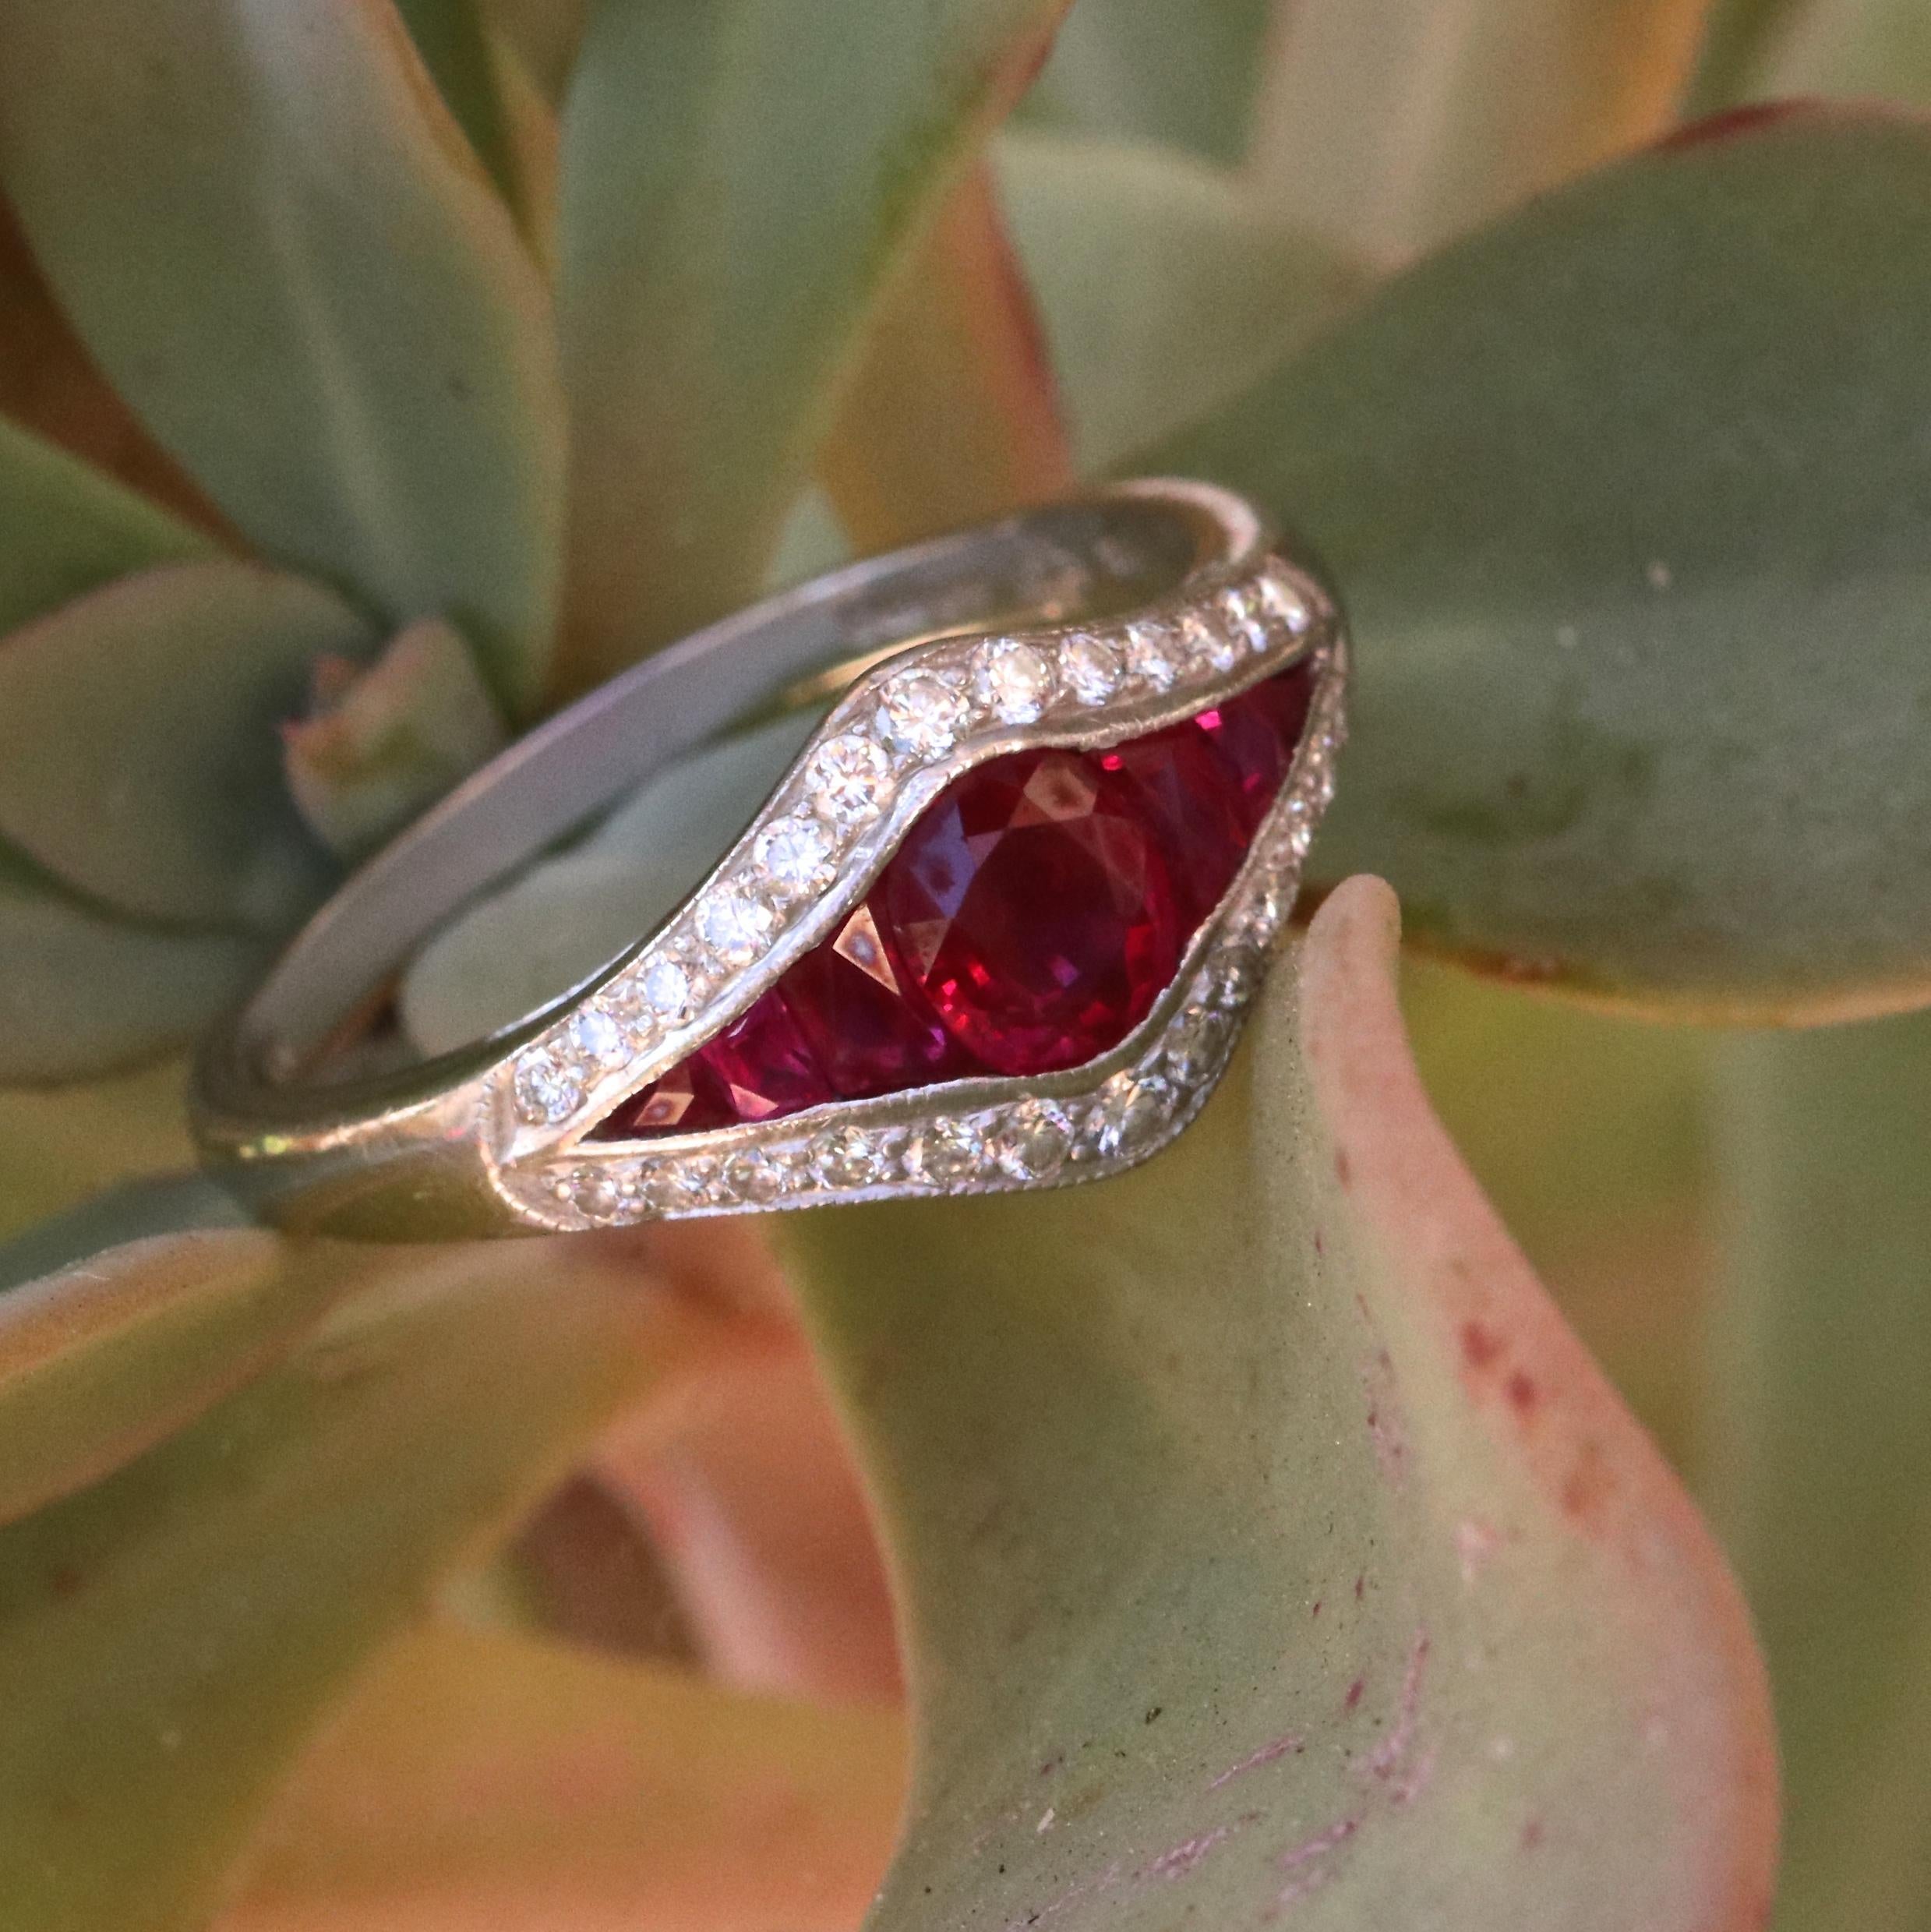 Pigeon's blood red rubies and bright white diamonds always delight. This is a modern English ring that showcases 7 faceted rubies weighing approximately 1.15 carats. Accented by 26 round brilliant diamonds graded E-F color, VS+ clarity. Stamped with